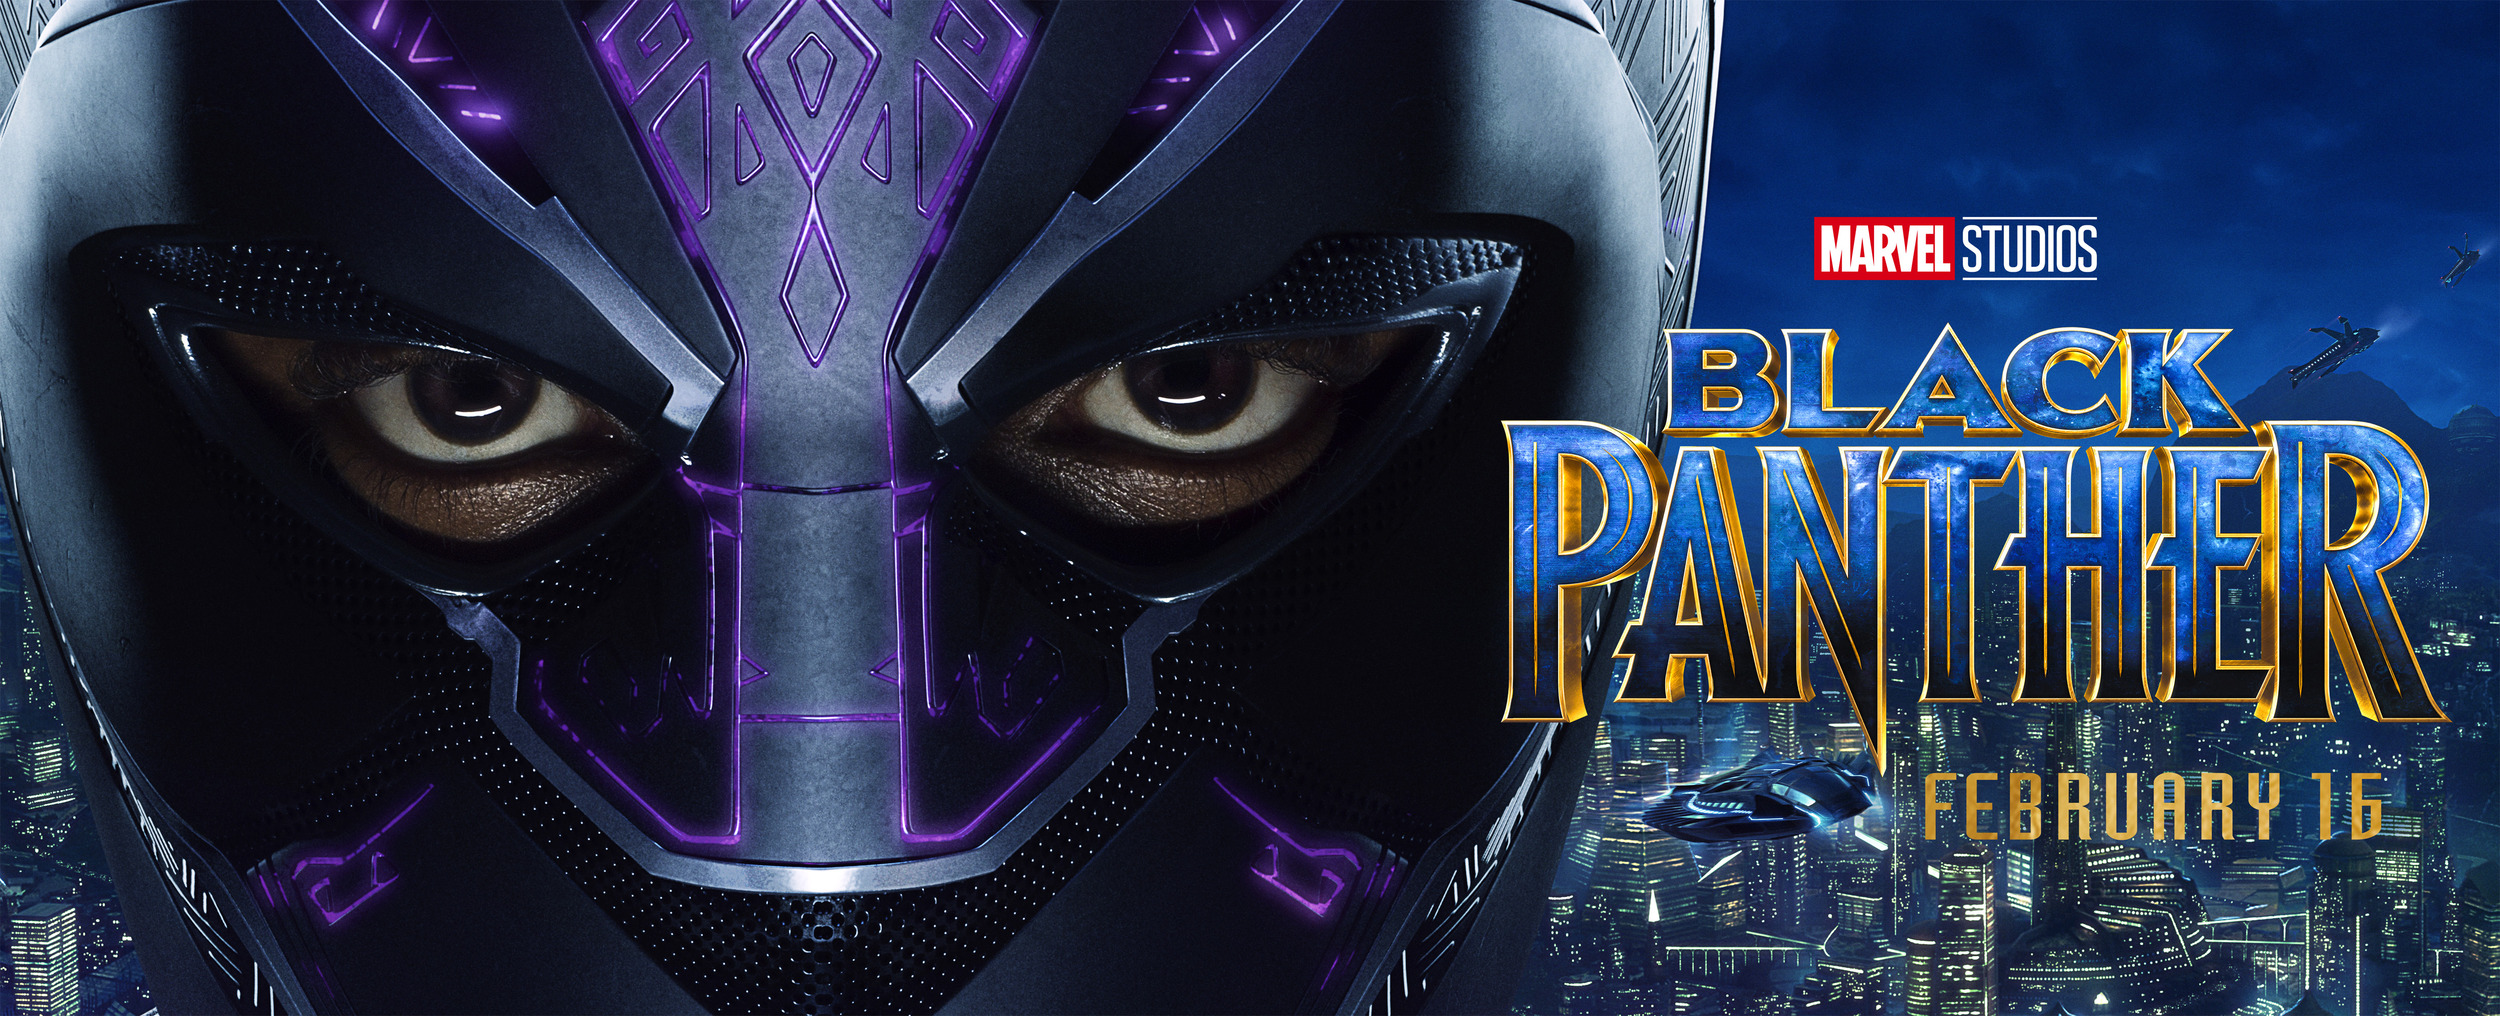 Mega Sized Movie Poster Image for Black Panther (#28 of 29)